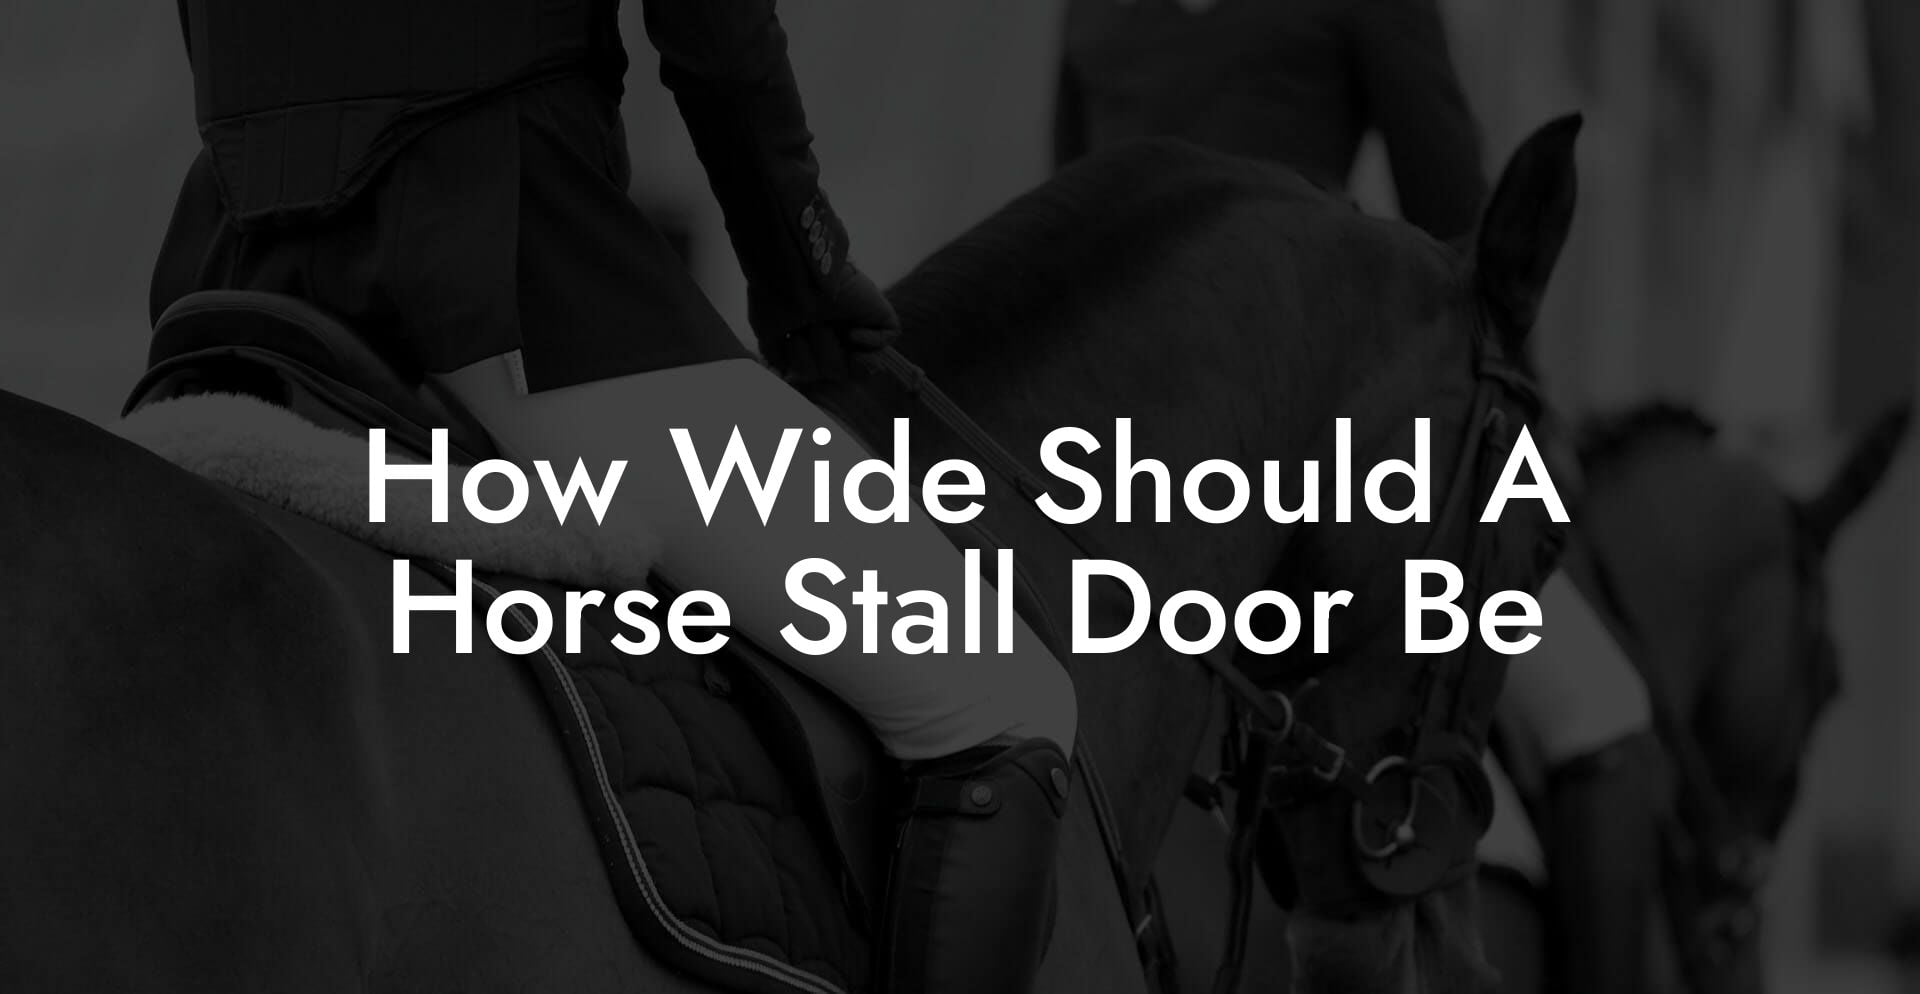 How Wide Should A Horse Stall Door Be - How To Own a Horse